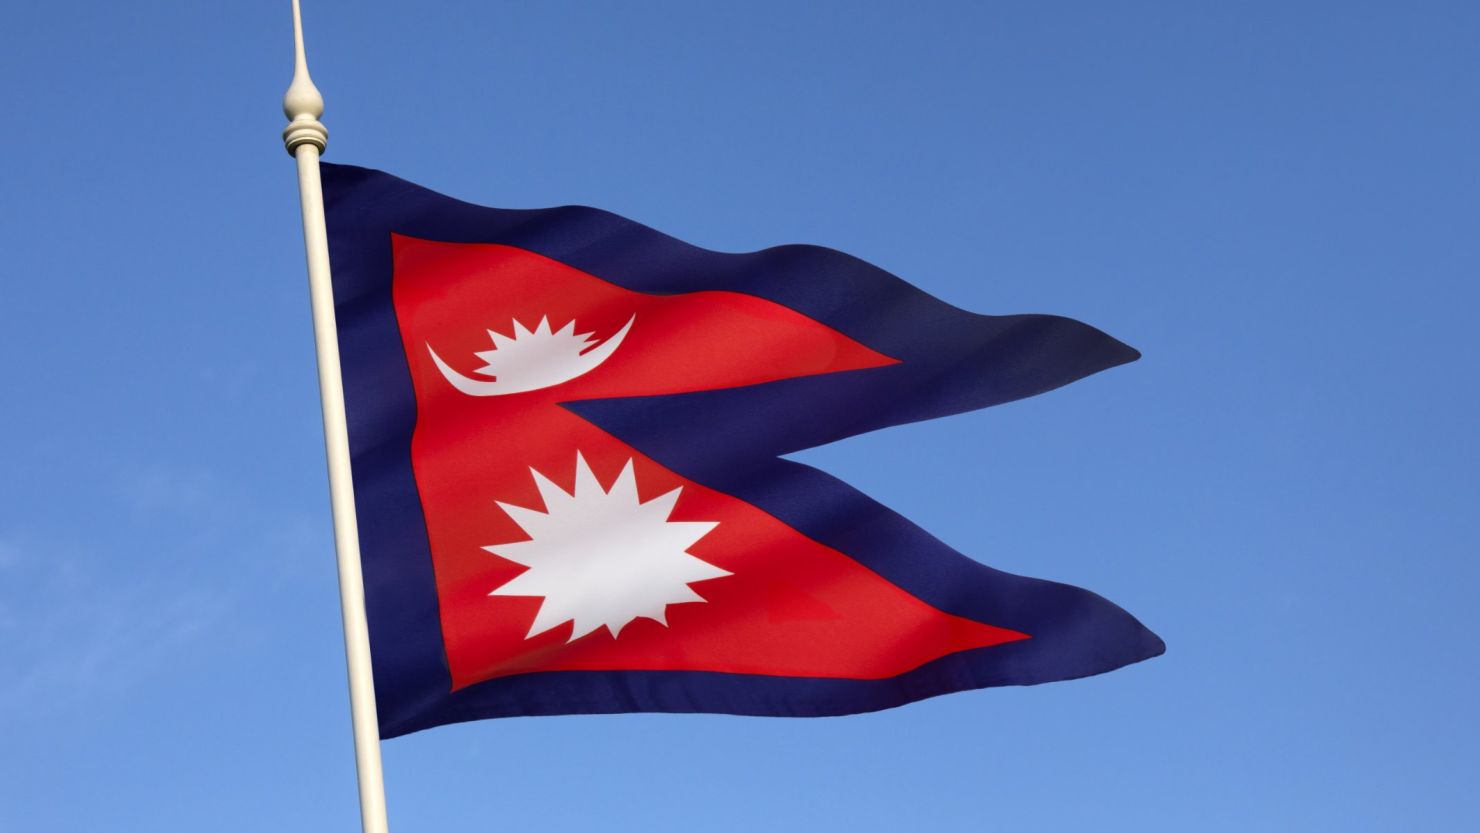 Nepal's flag is the only national flag that isn't rectangular or square.